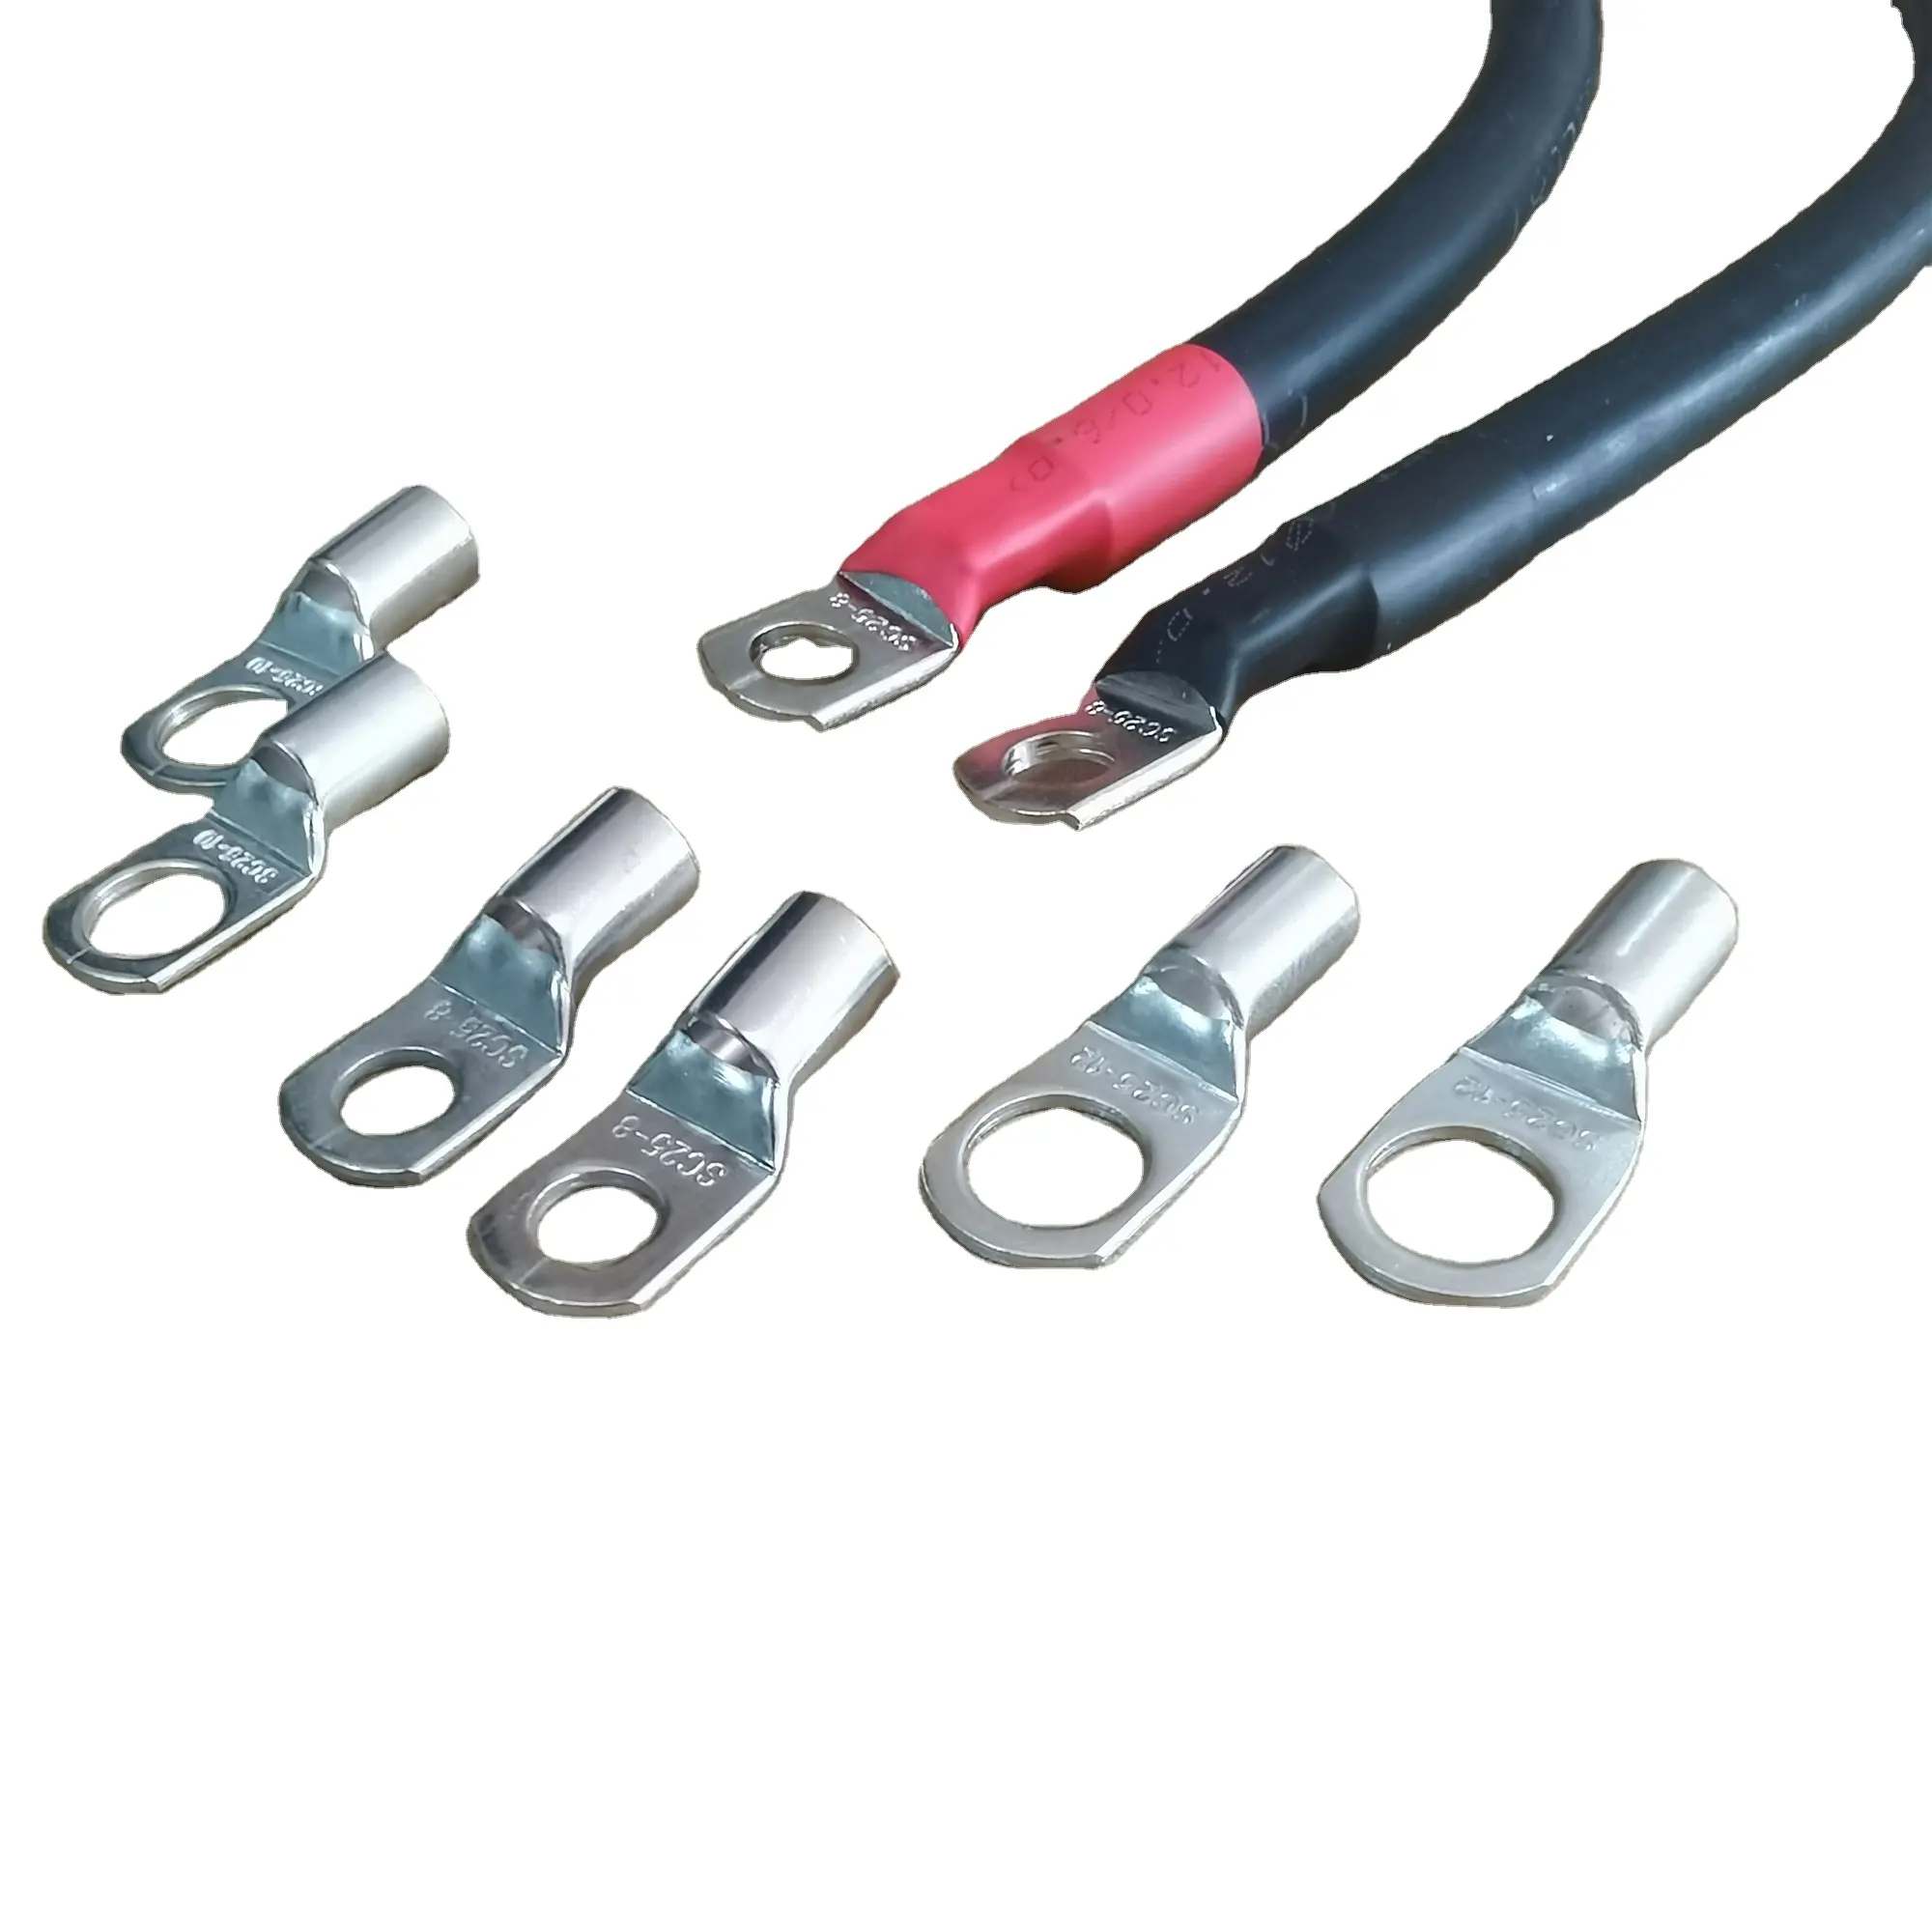 8 AWG # 10 Stud Marine Grade Wire Lugs, Battery Cable Ends, Tinned Copper Eyelets, Tubular Ring Terminal Connectors